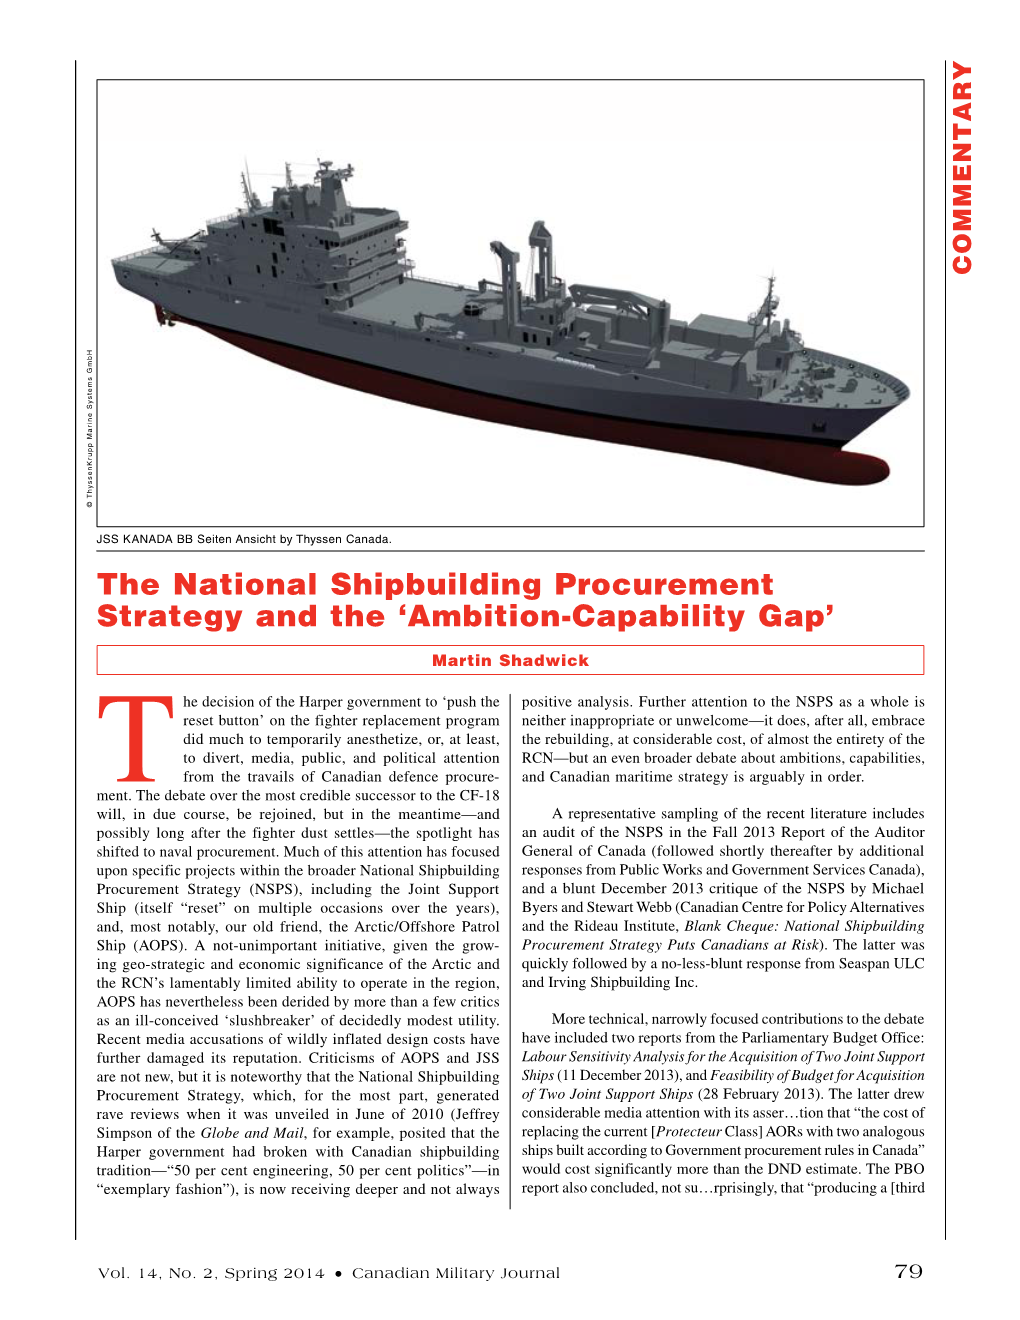 The National Shipbuilding Procurement Strategy and the ‘Ambition-Capability Gap’